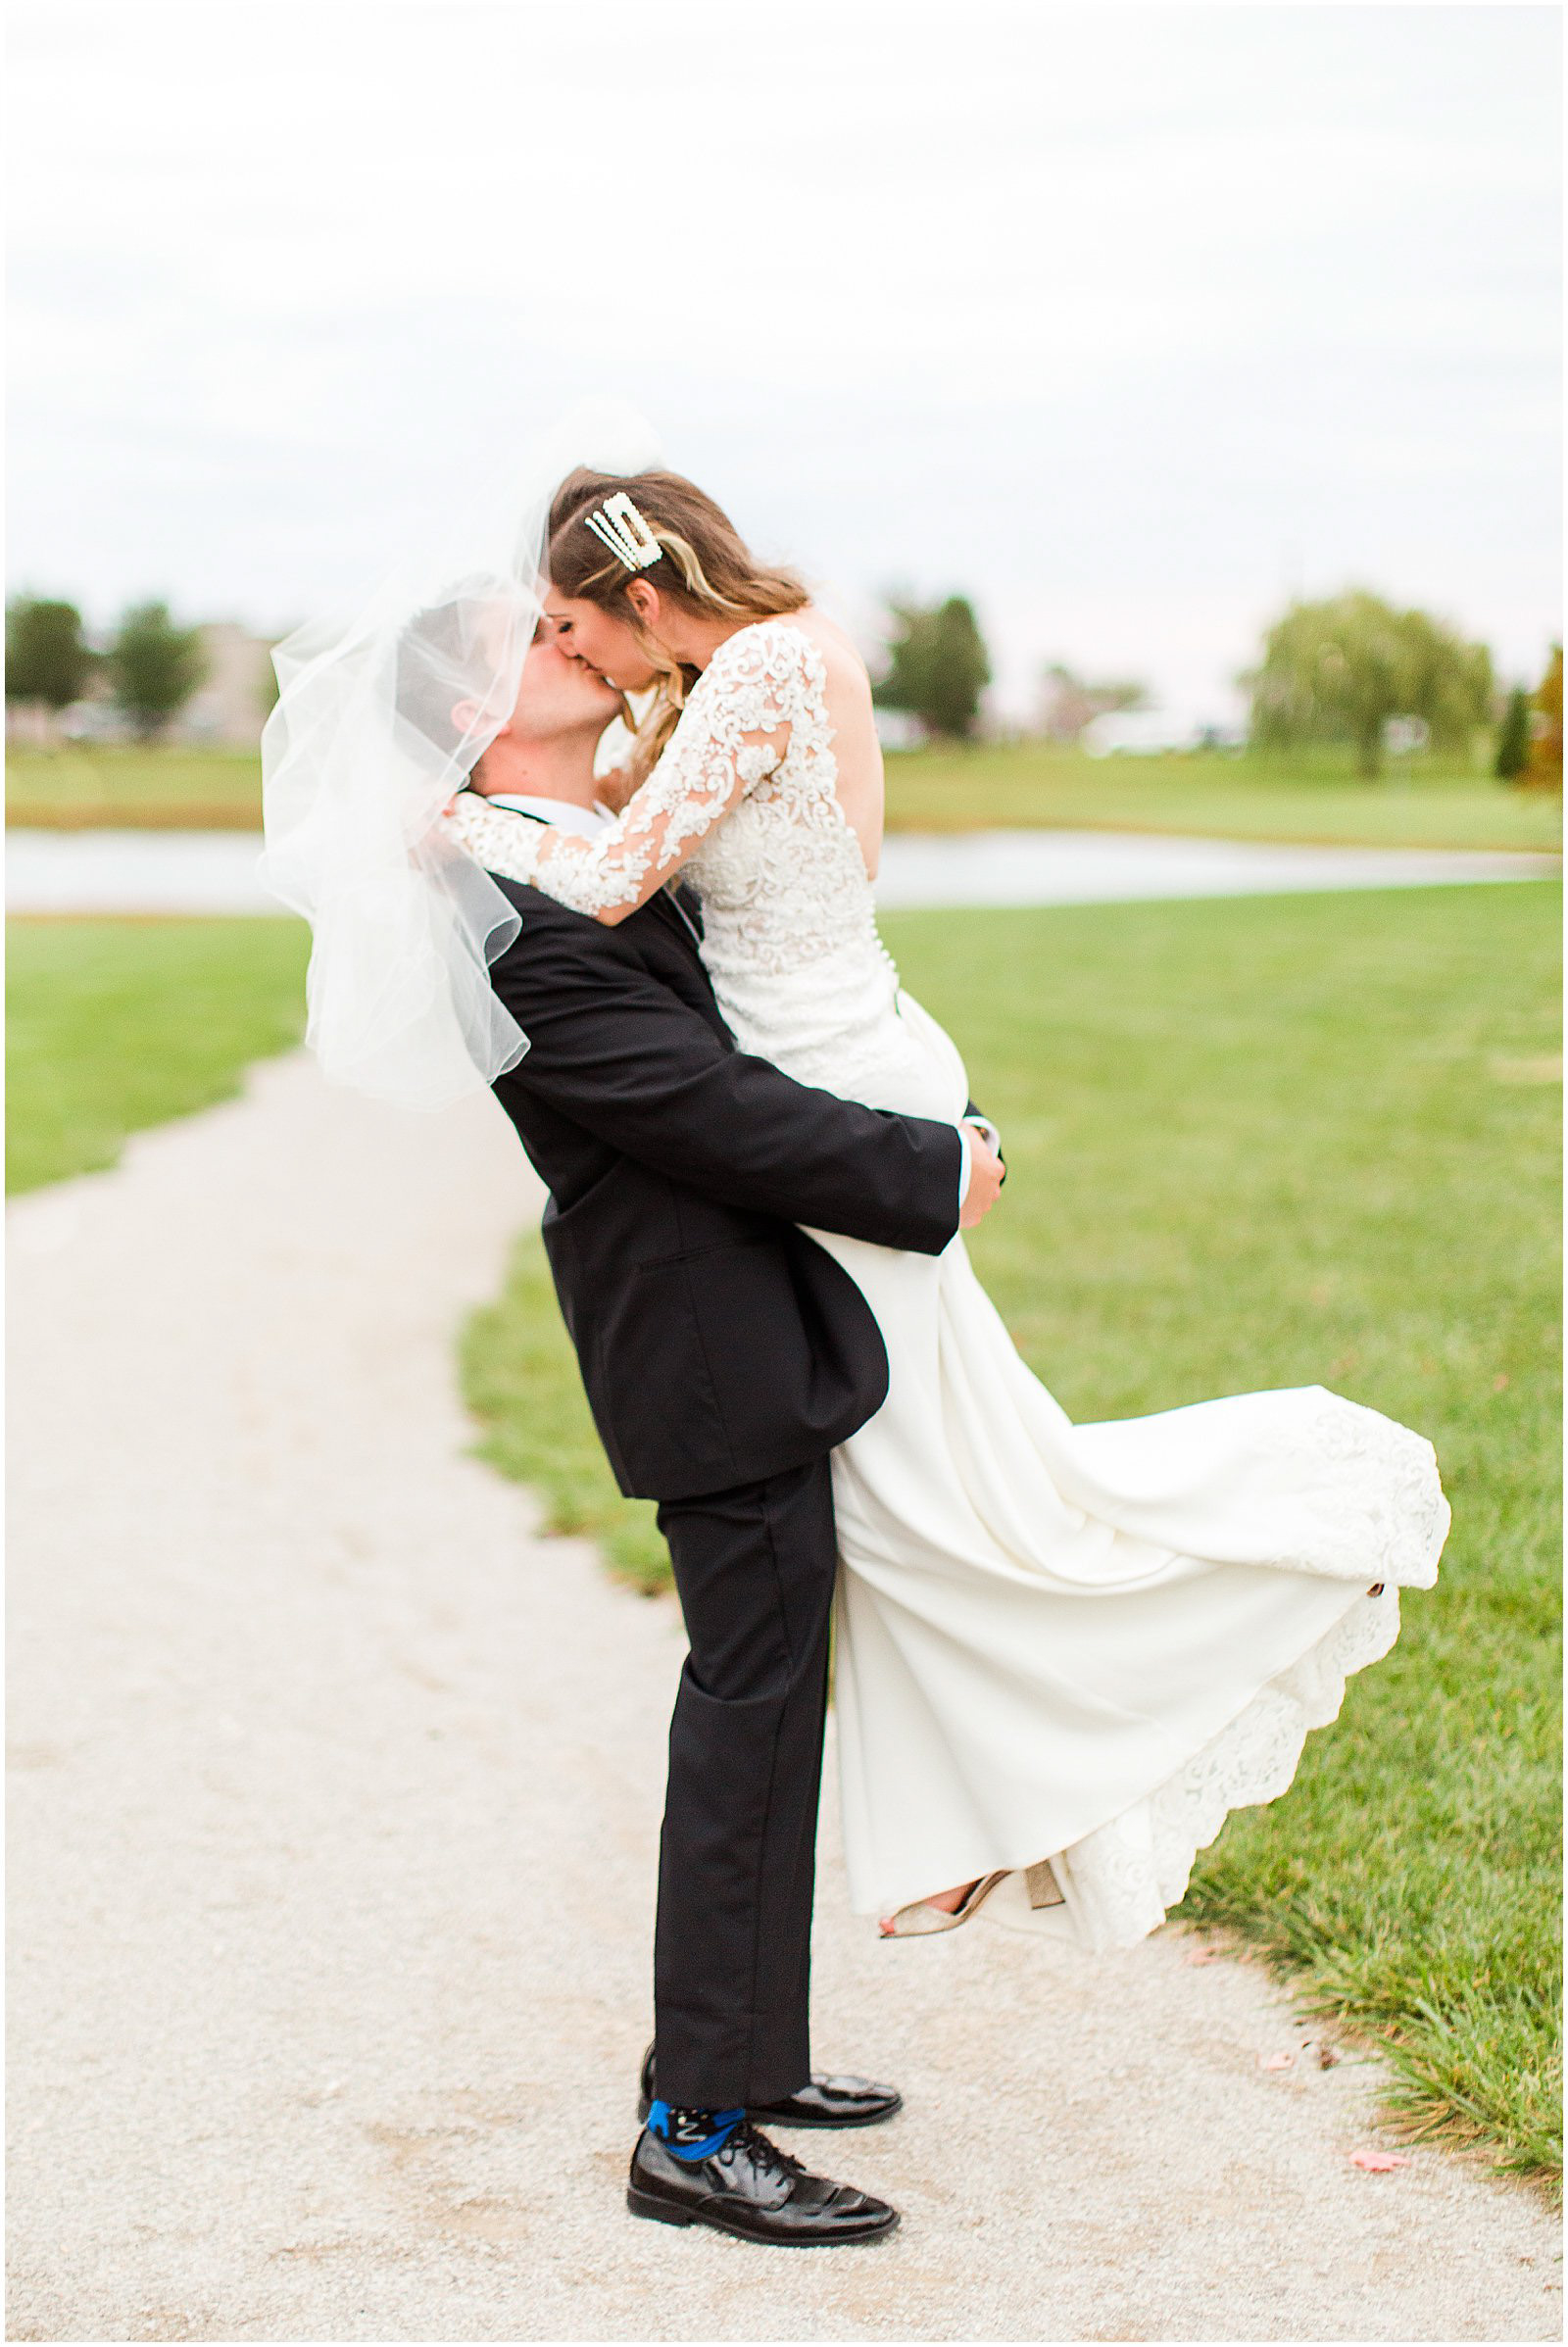 A Romantic Fall Wedding in Ferdinand, IN | Tori and Kyle | Bret and Brandie Photography 0143.jpg